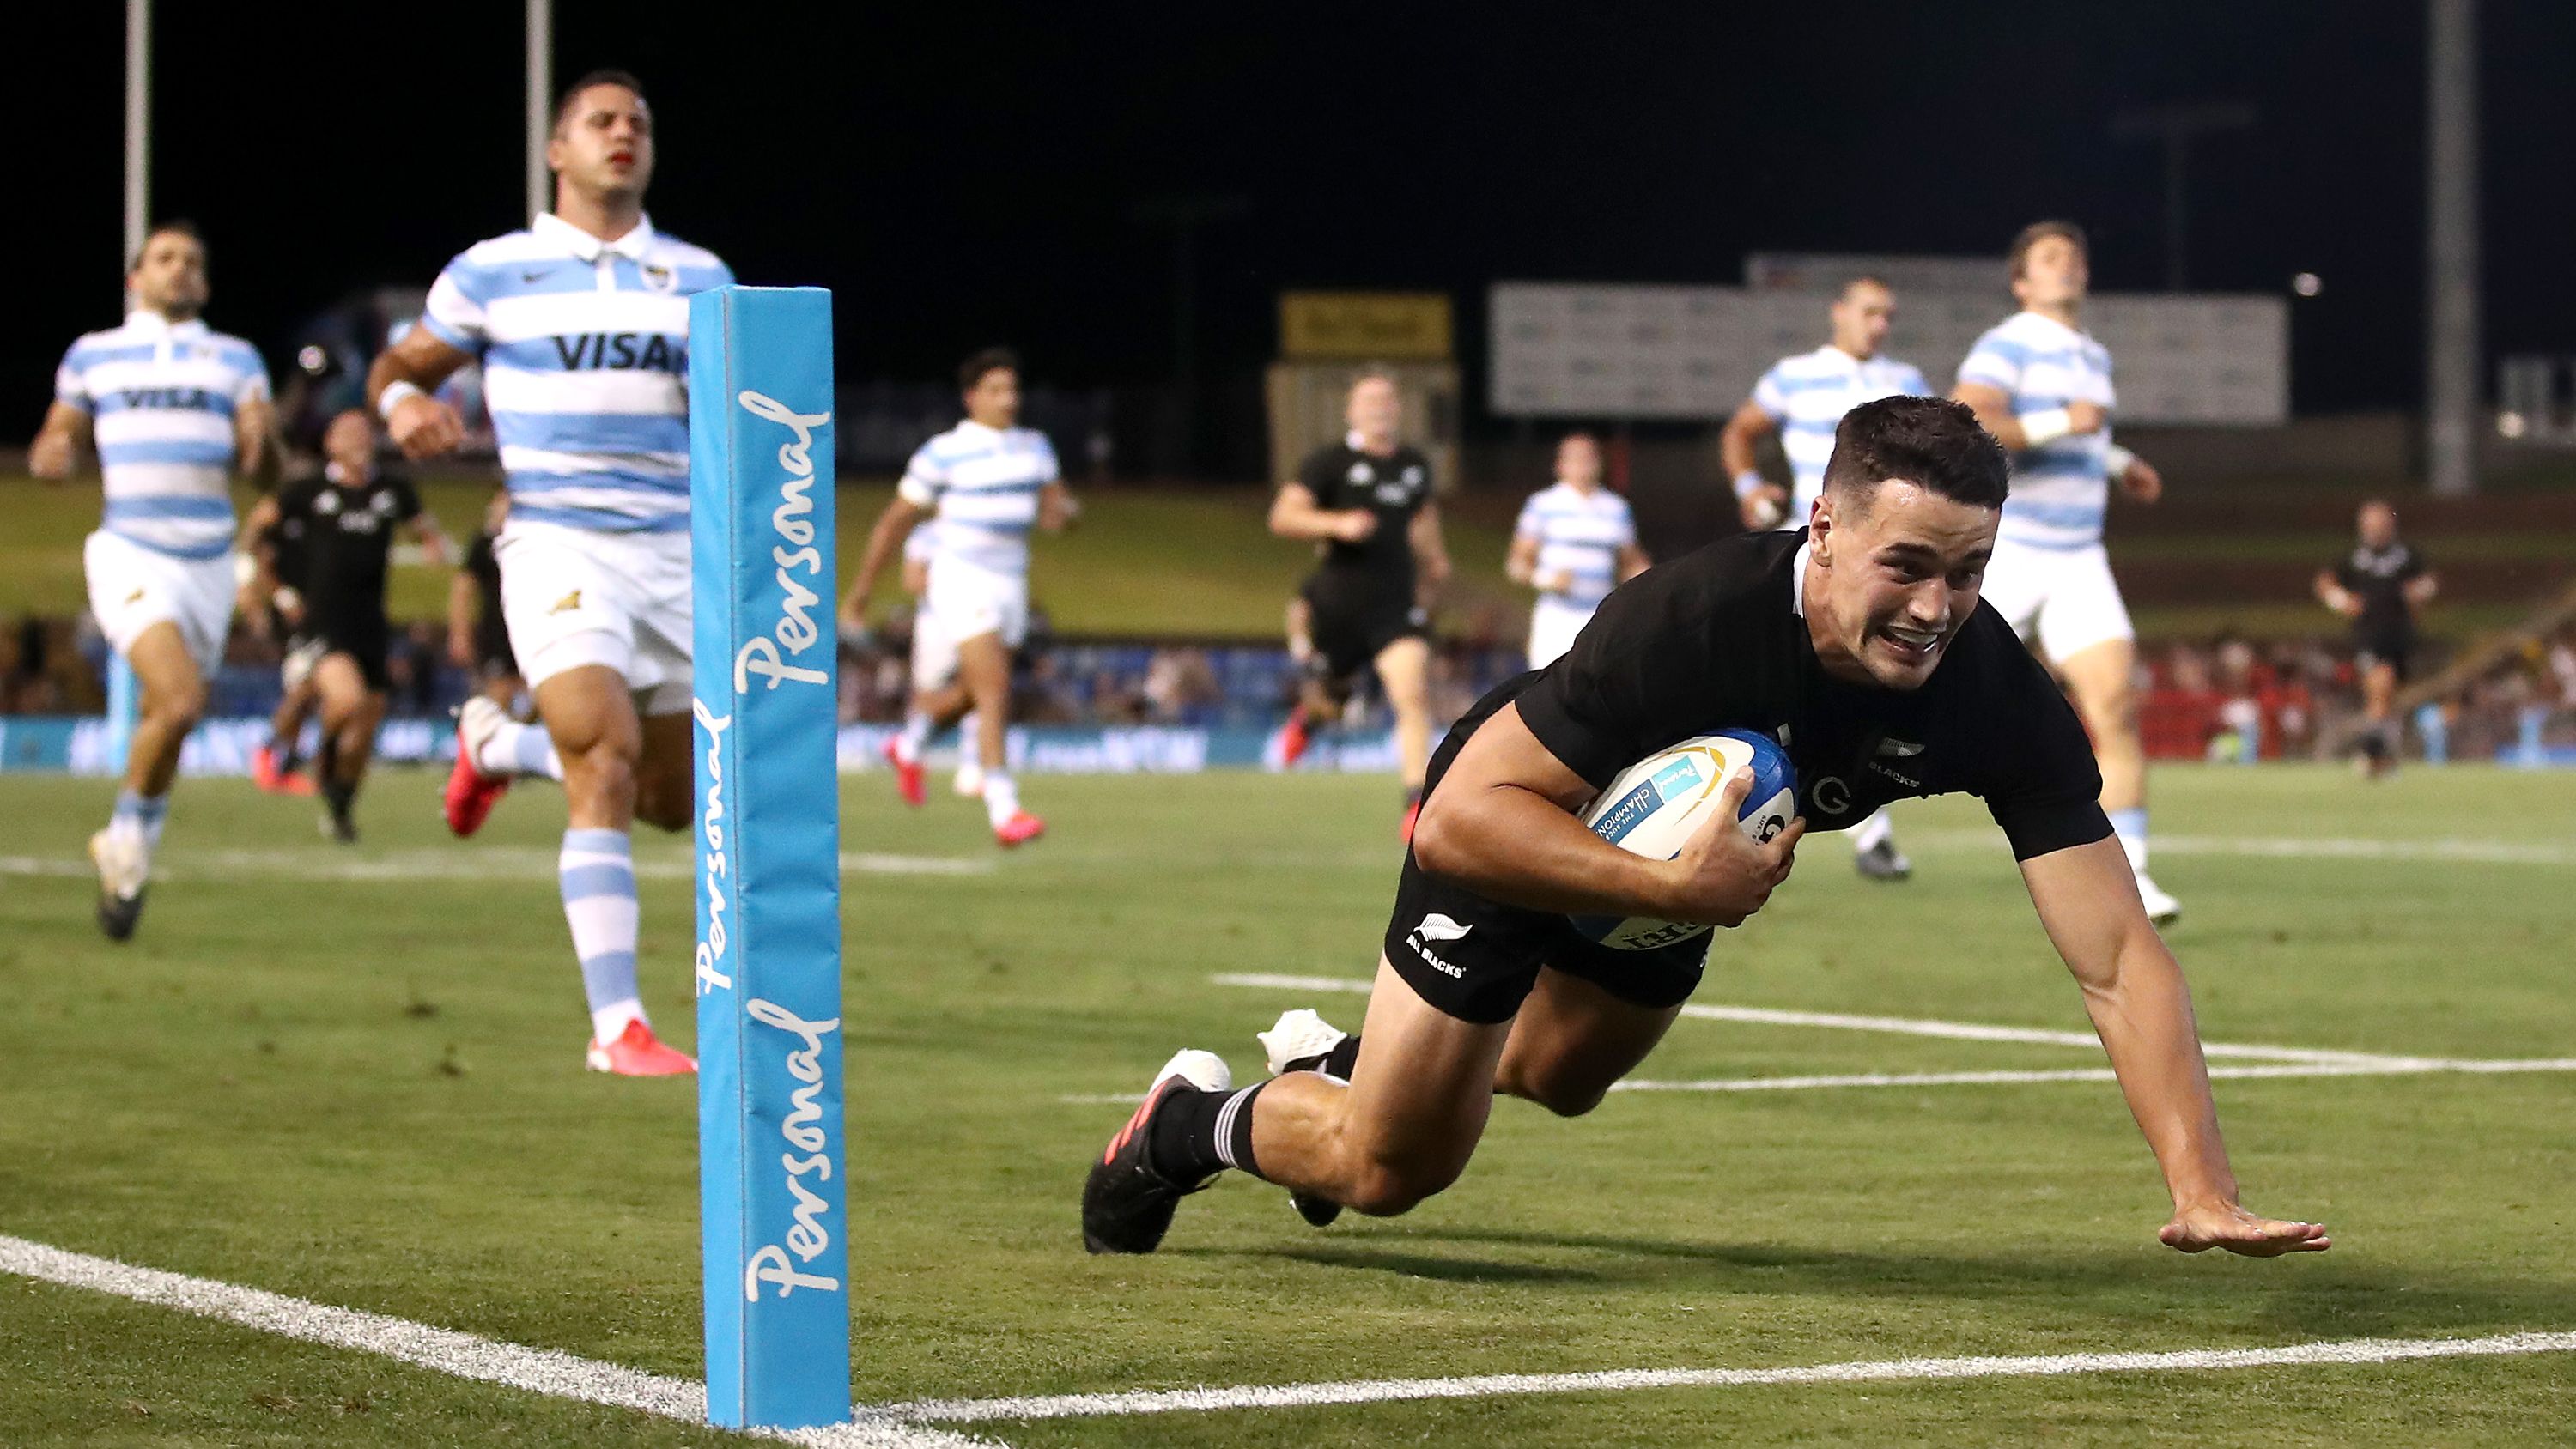 Will Jordan of the All Blacks makes a break to score a try.